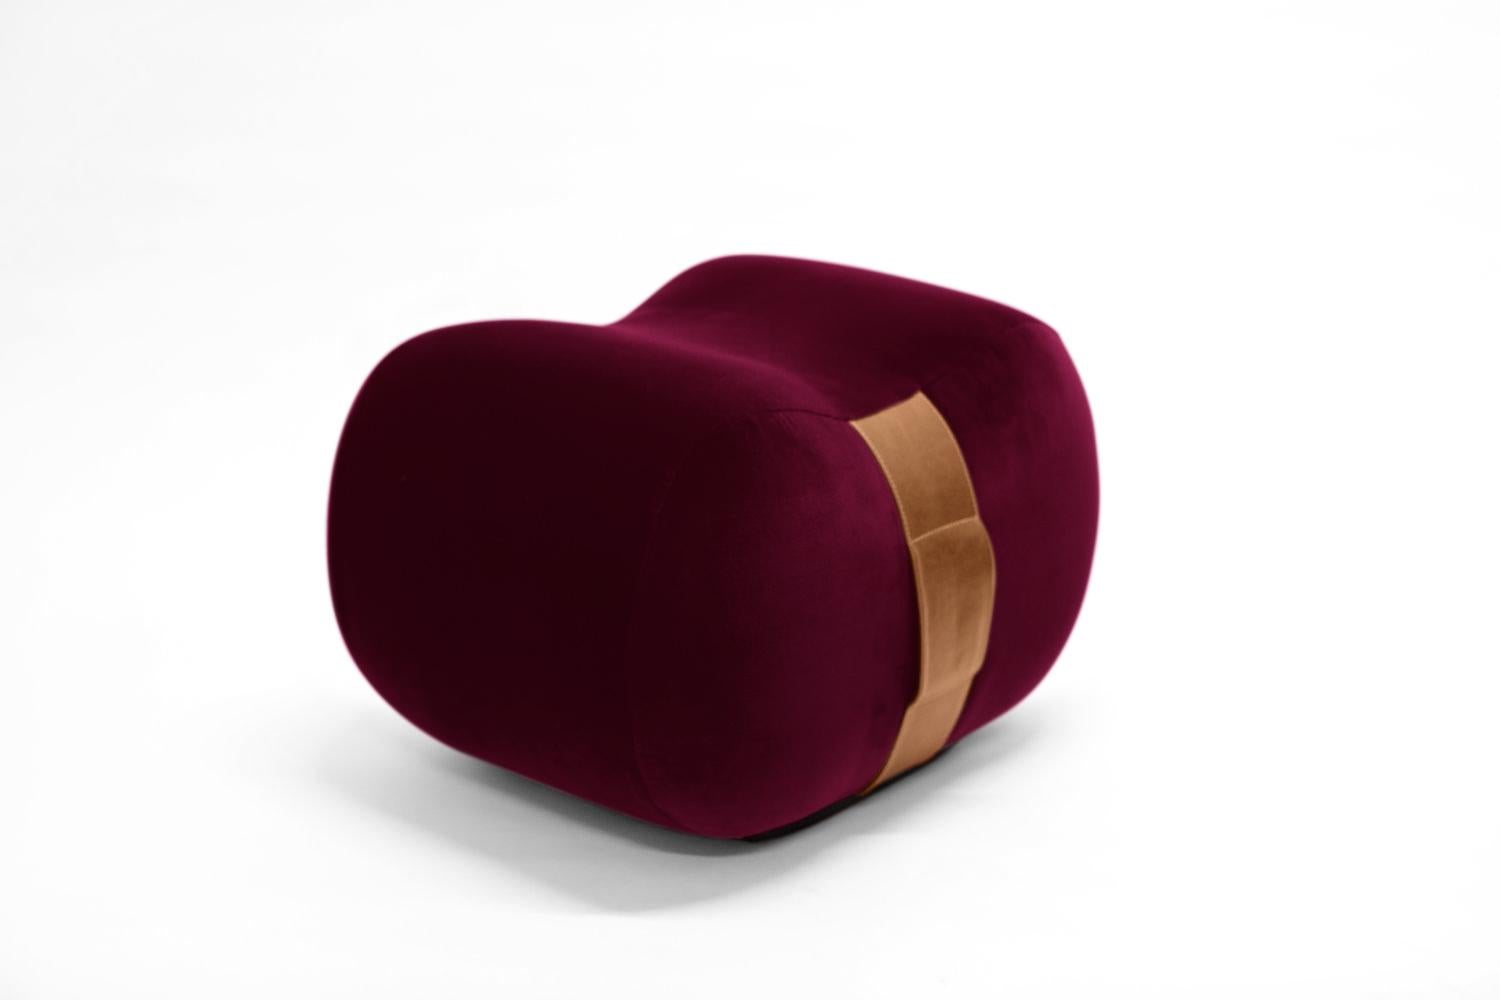 The Milo Bean, you can sit on it, lean against it, and carry it. This fun, colorful, curvy design by Marie Burgos may be the ultimate in portable seating. Crafted in plush fabrics with leather accent handles The Milo Bean offers style, convenience